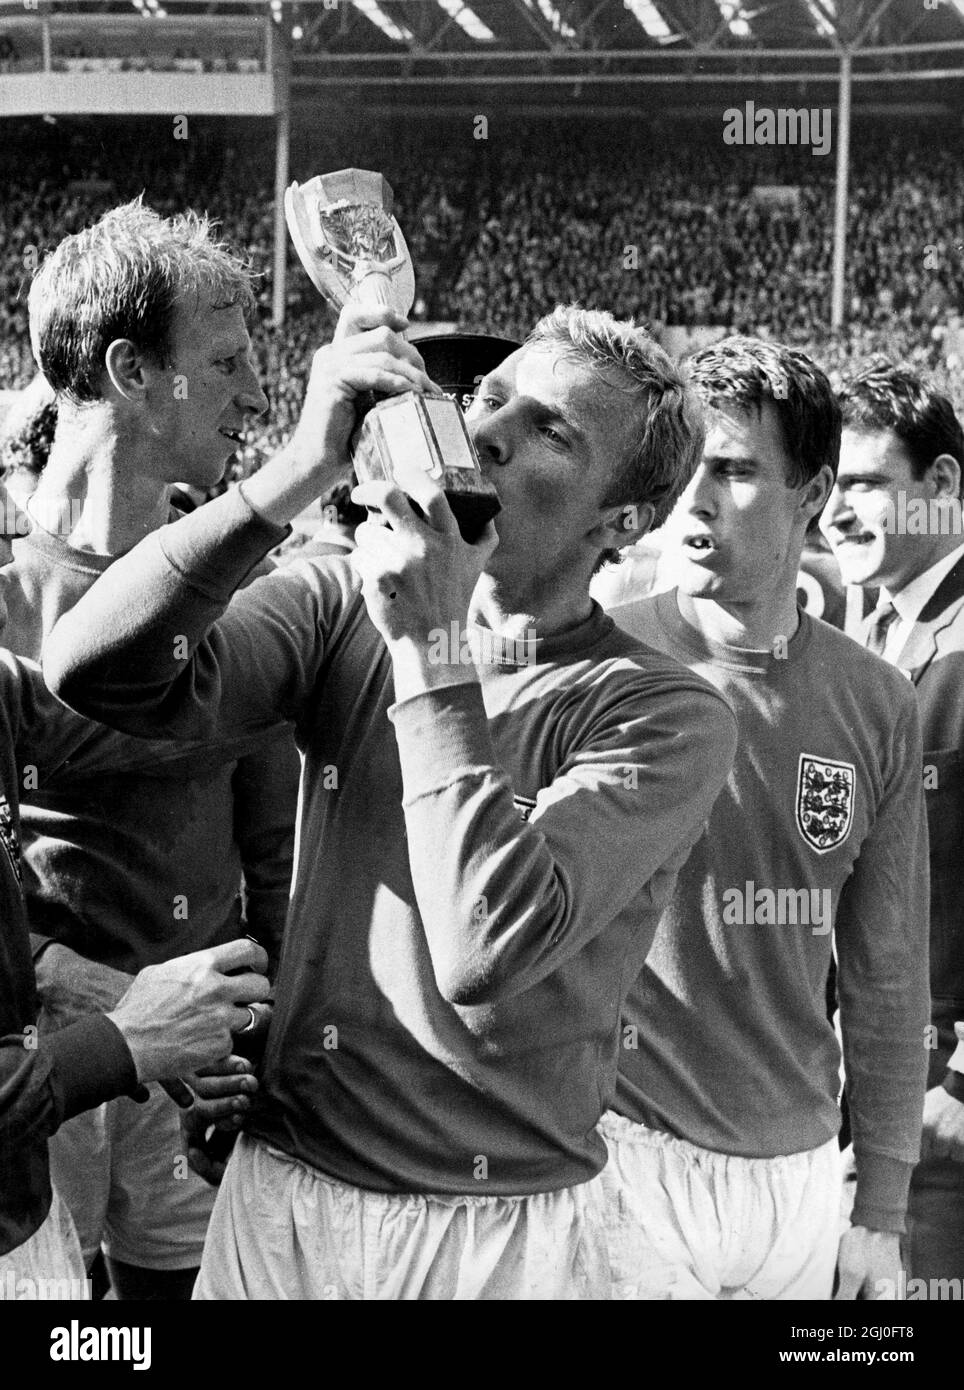 England captain Bobby Moore plants an enthusiastic kiss on the Jules Rimet Trophy, presented to him by the Queen, after leading his men to 4-2 victory (after extra time) over West Germany in the World Cup final at Wembley Stadium. On the right is Geoff Hurst who scored three of the England goals and on the left is Jack Charlton. 30 July 1966 Stock Photo